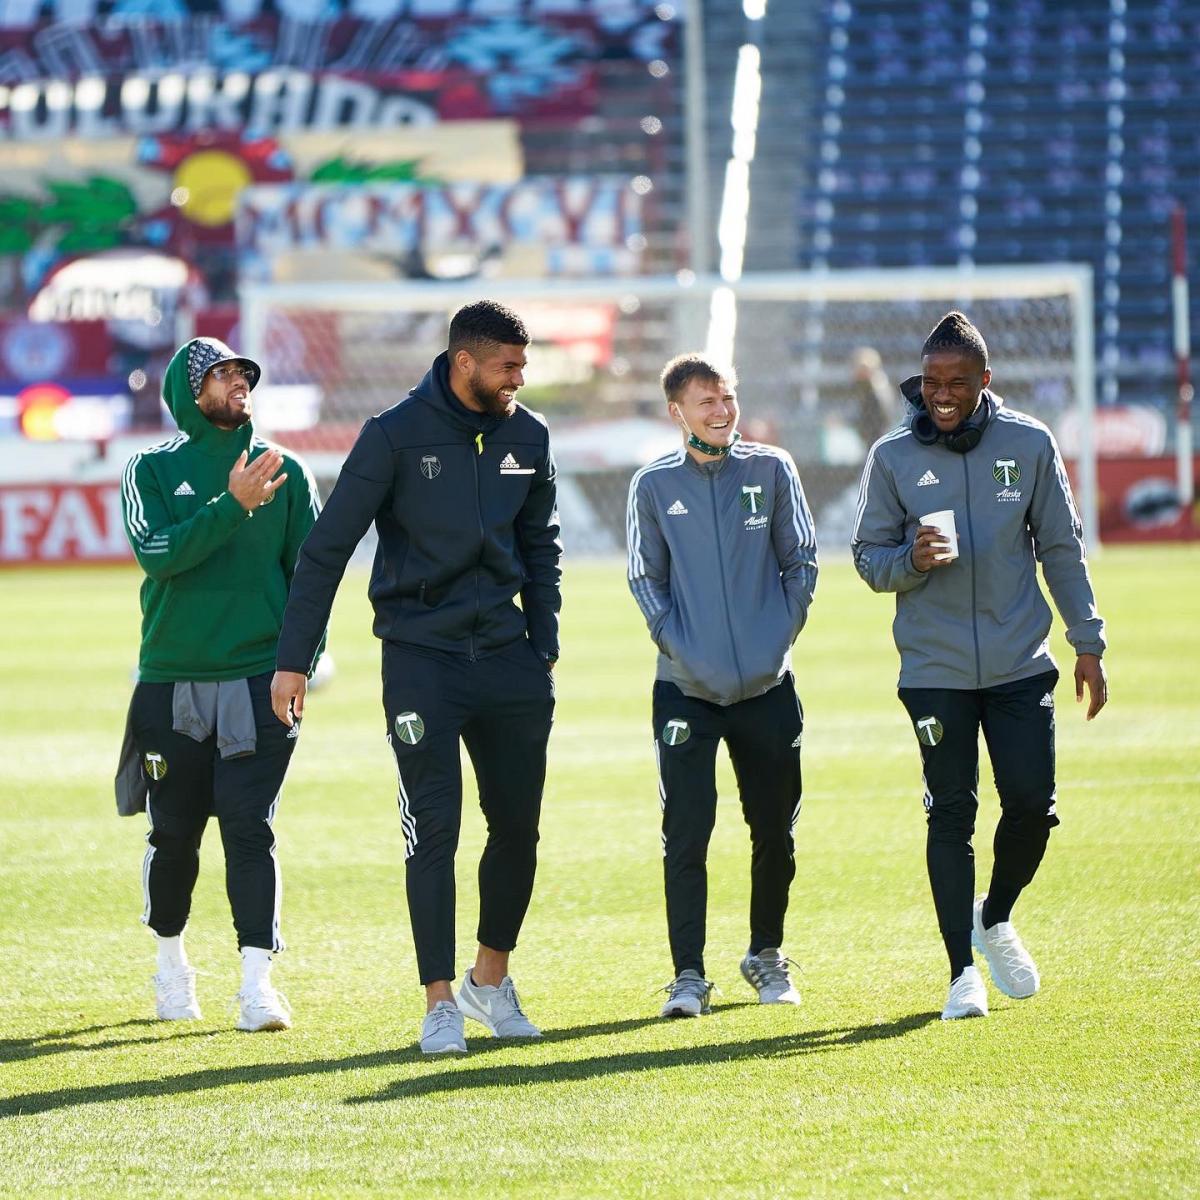 Timbers players recognize the field/ Image: TimbersFC